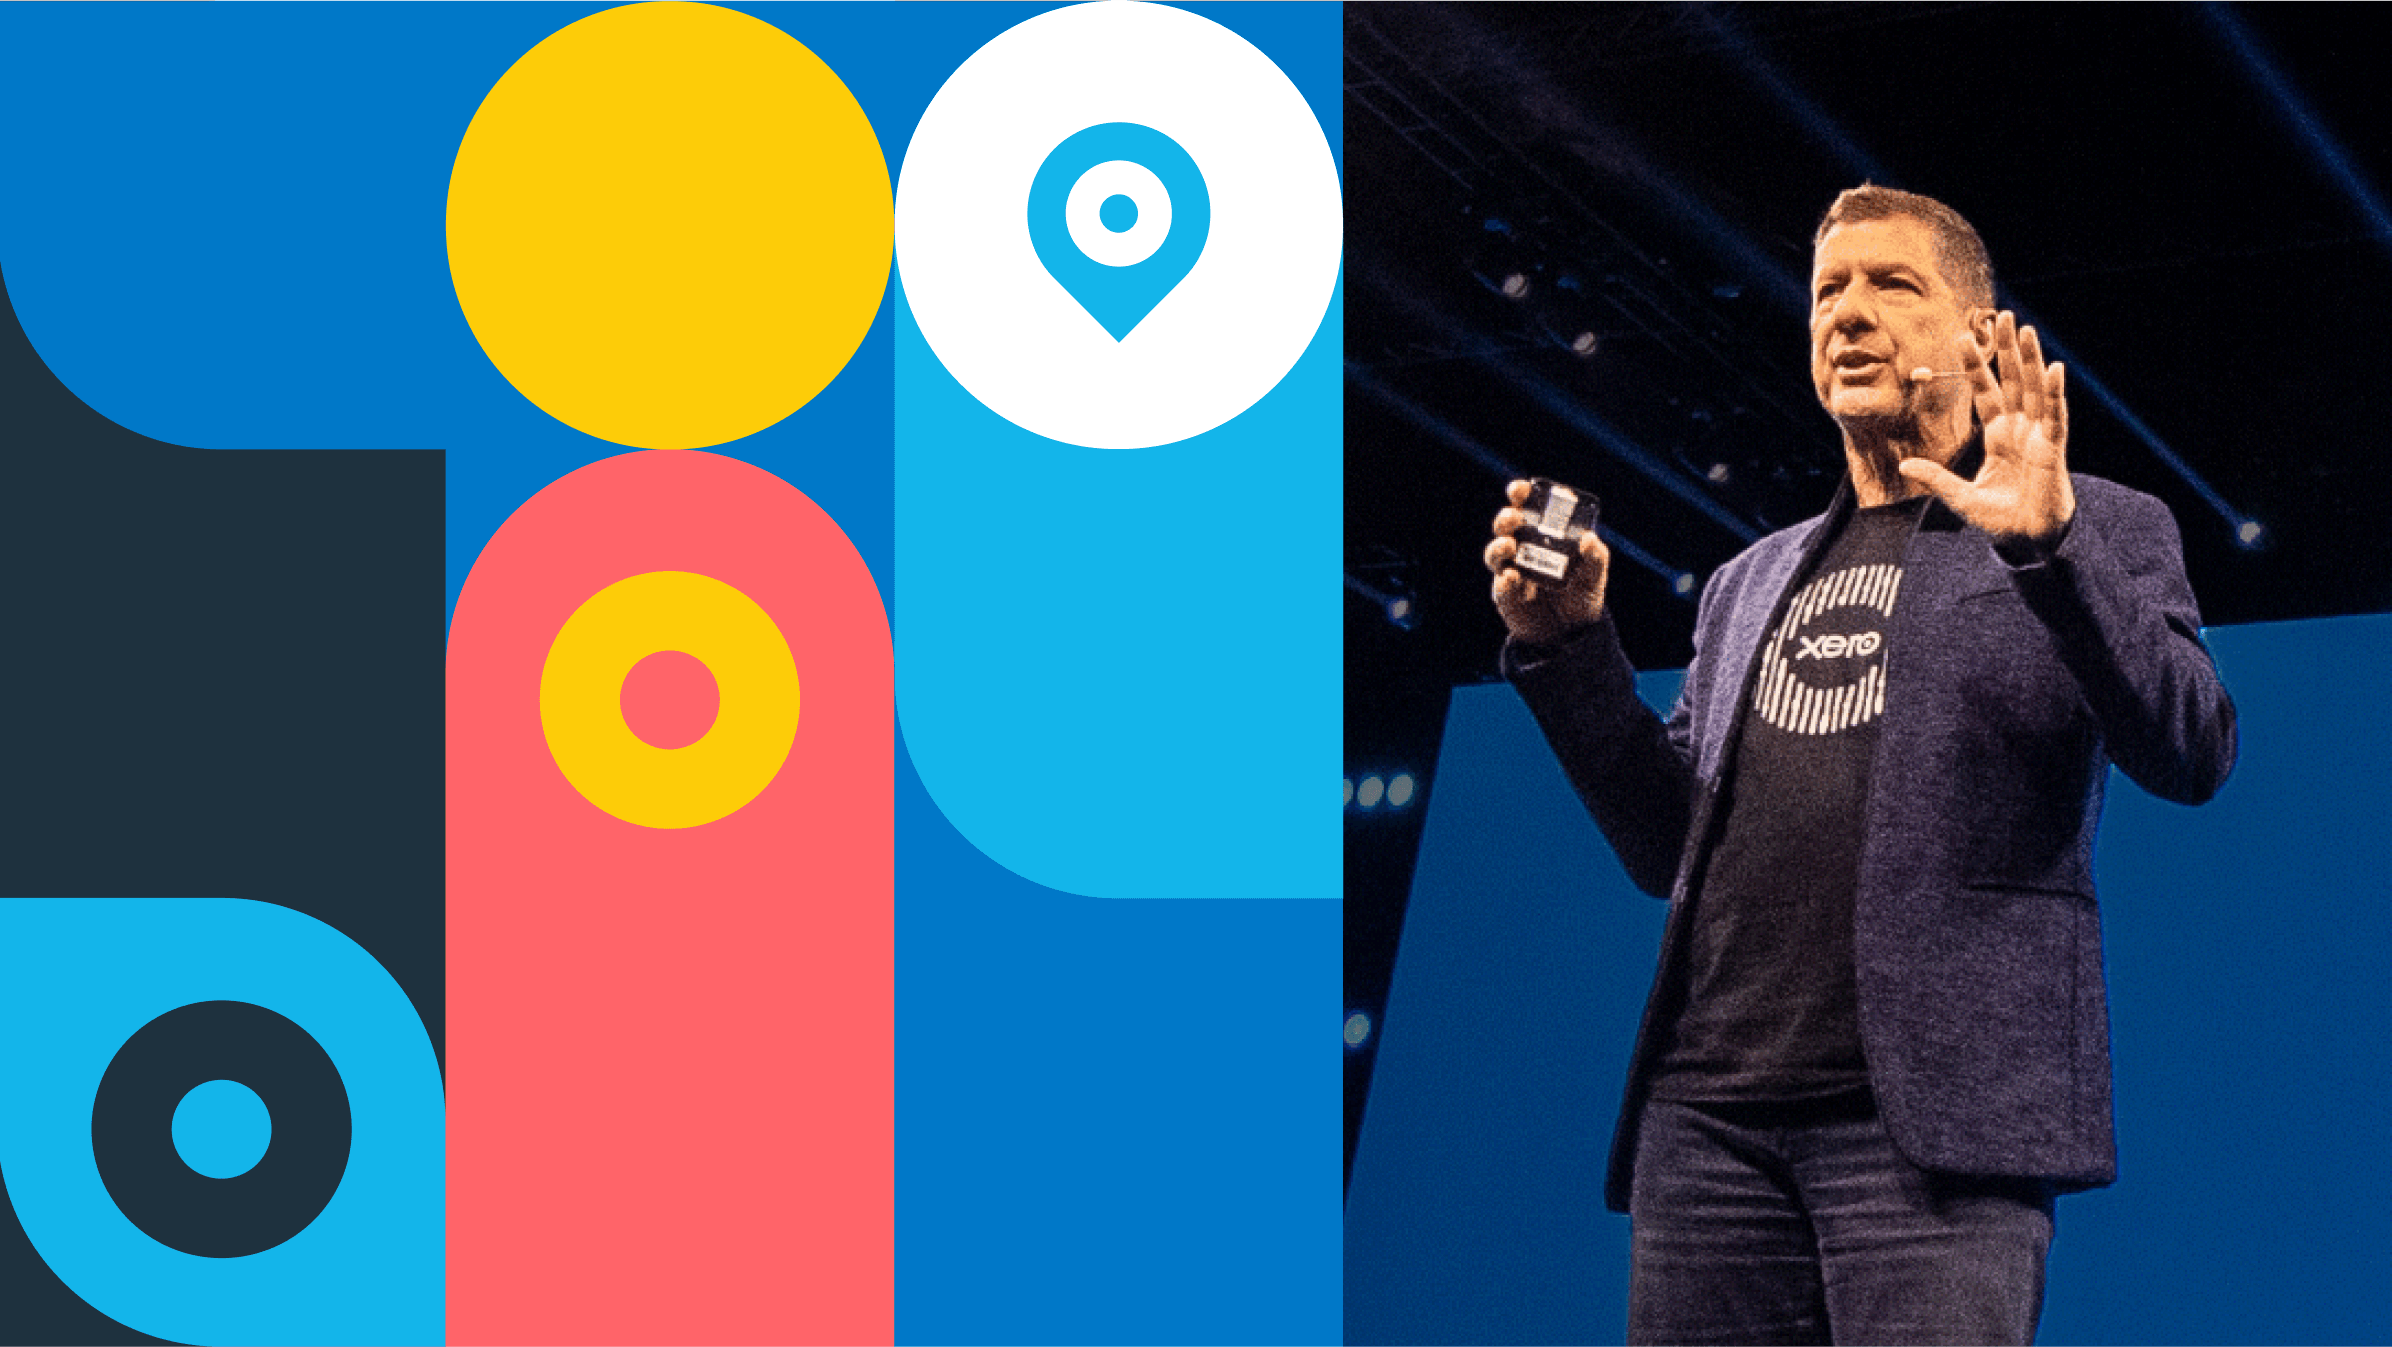 A presenter in a Xero t-shirt uses a remote control to operate a slide show. In the background is a colourful Xerocon graphic